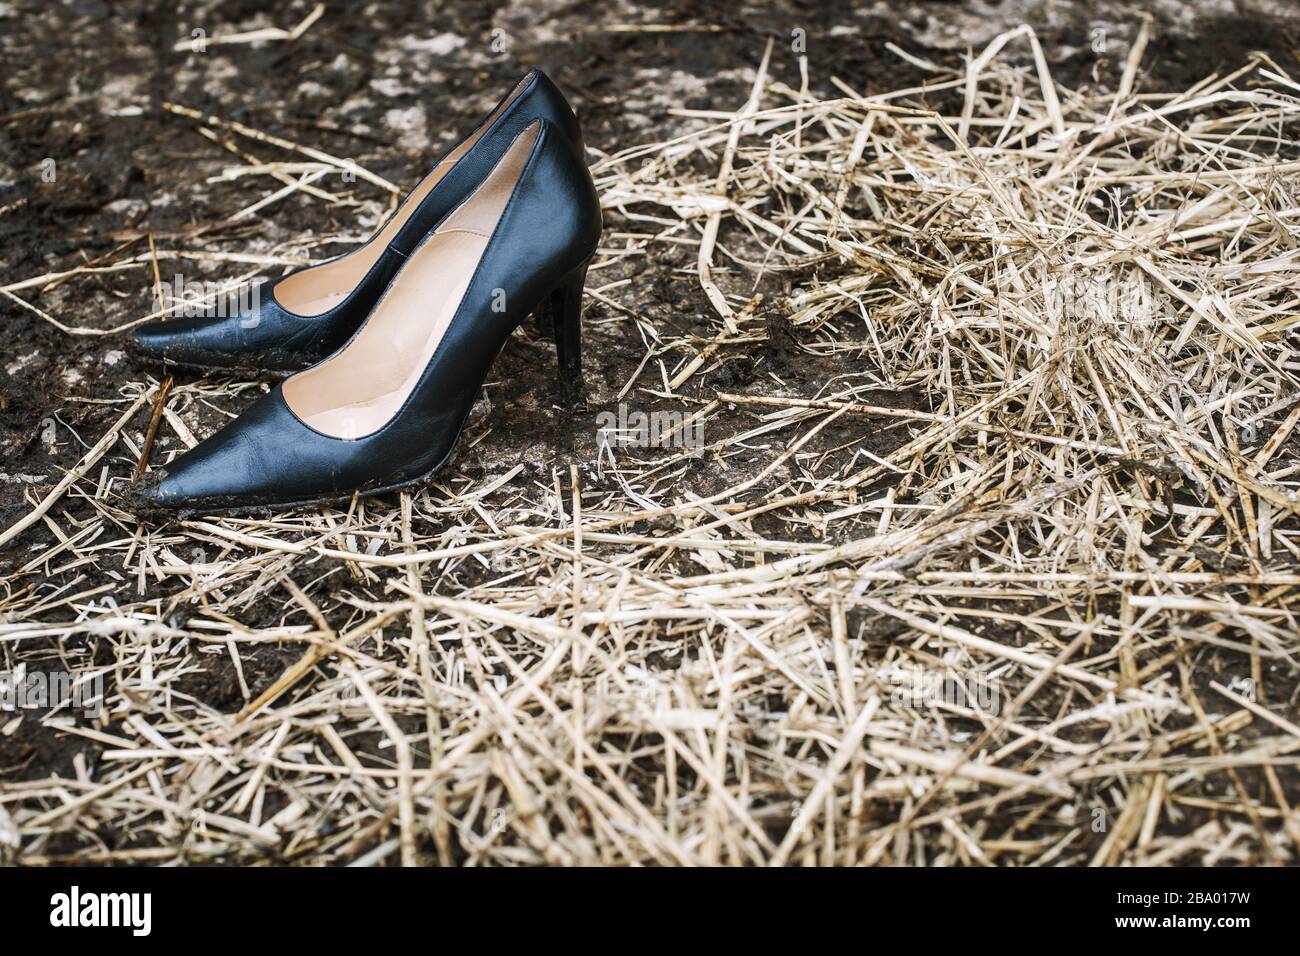 Smart woman's shoes in mud & straw Stock Photo